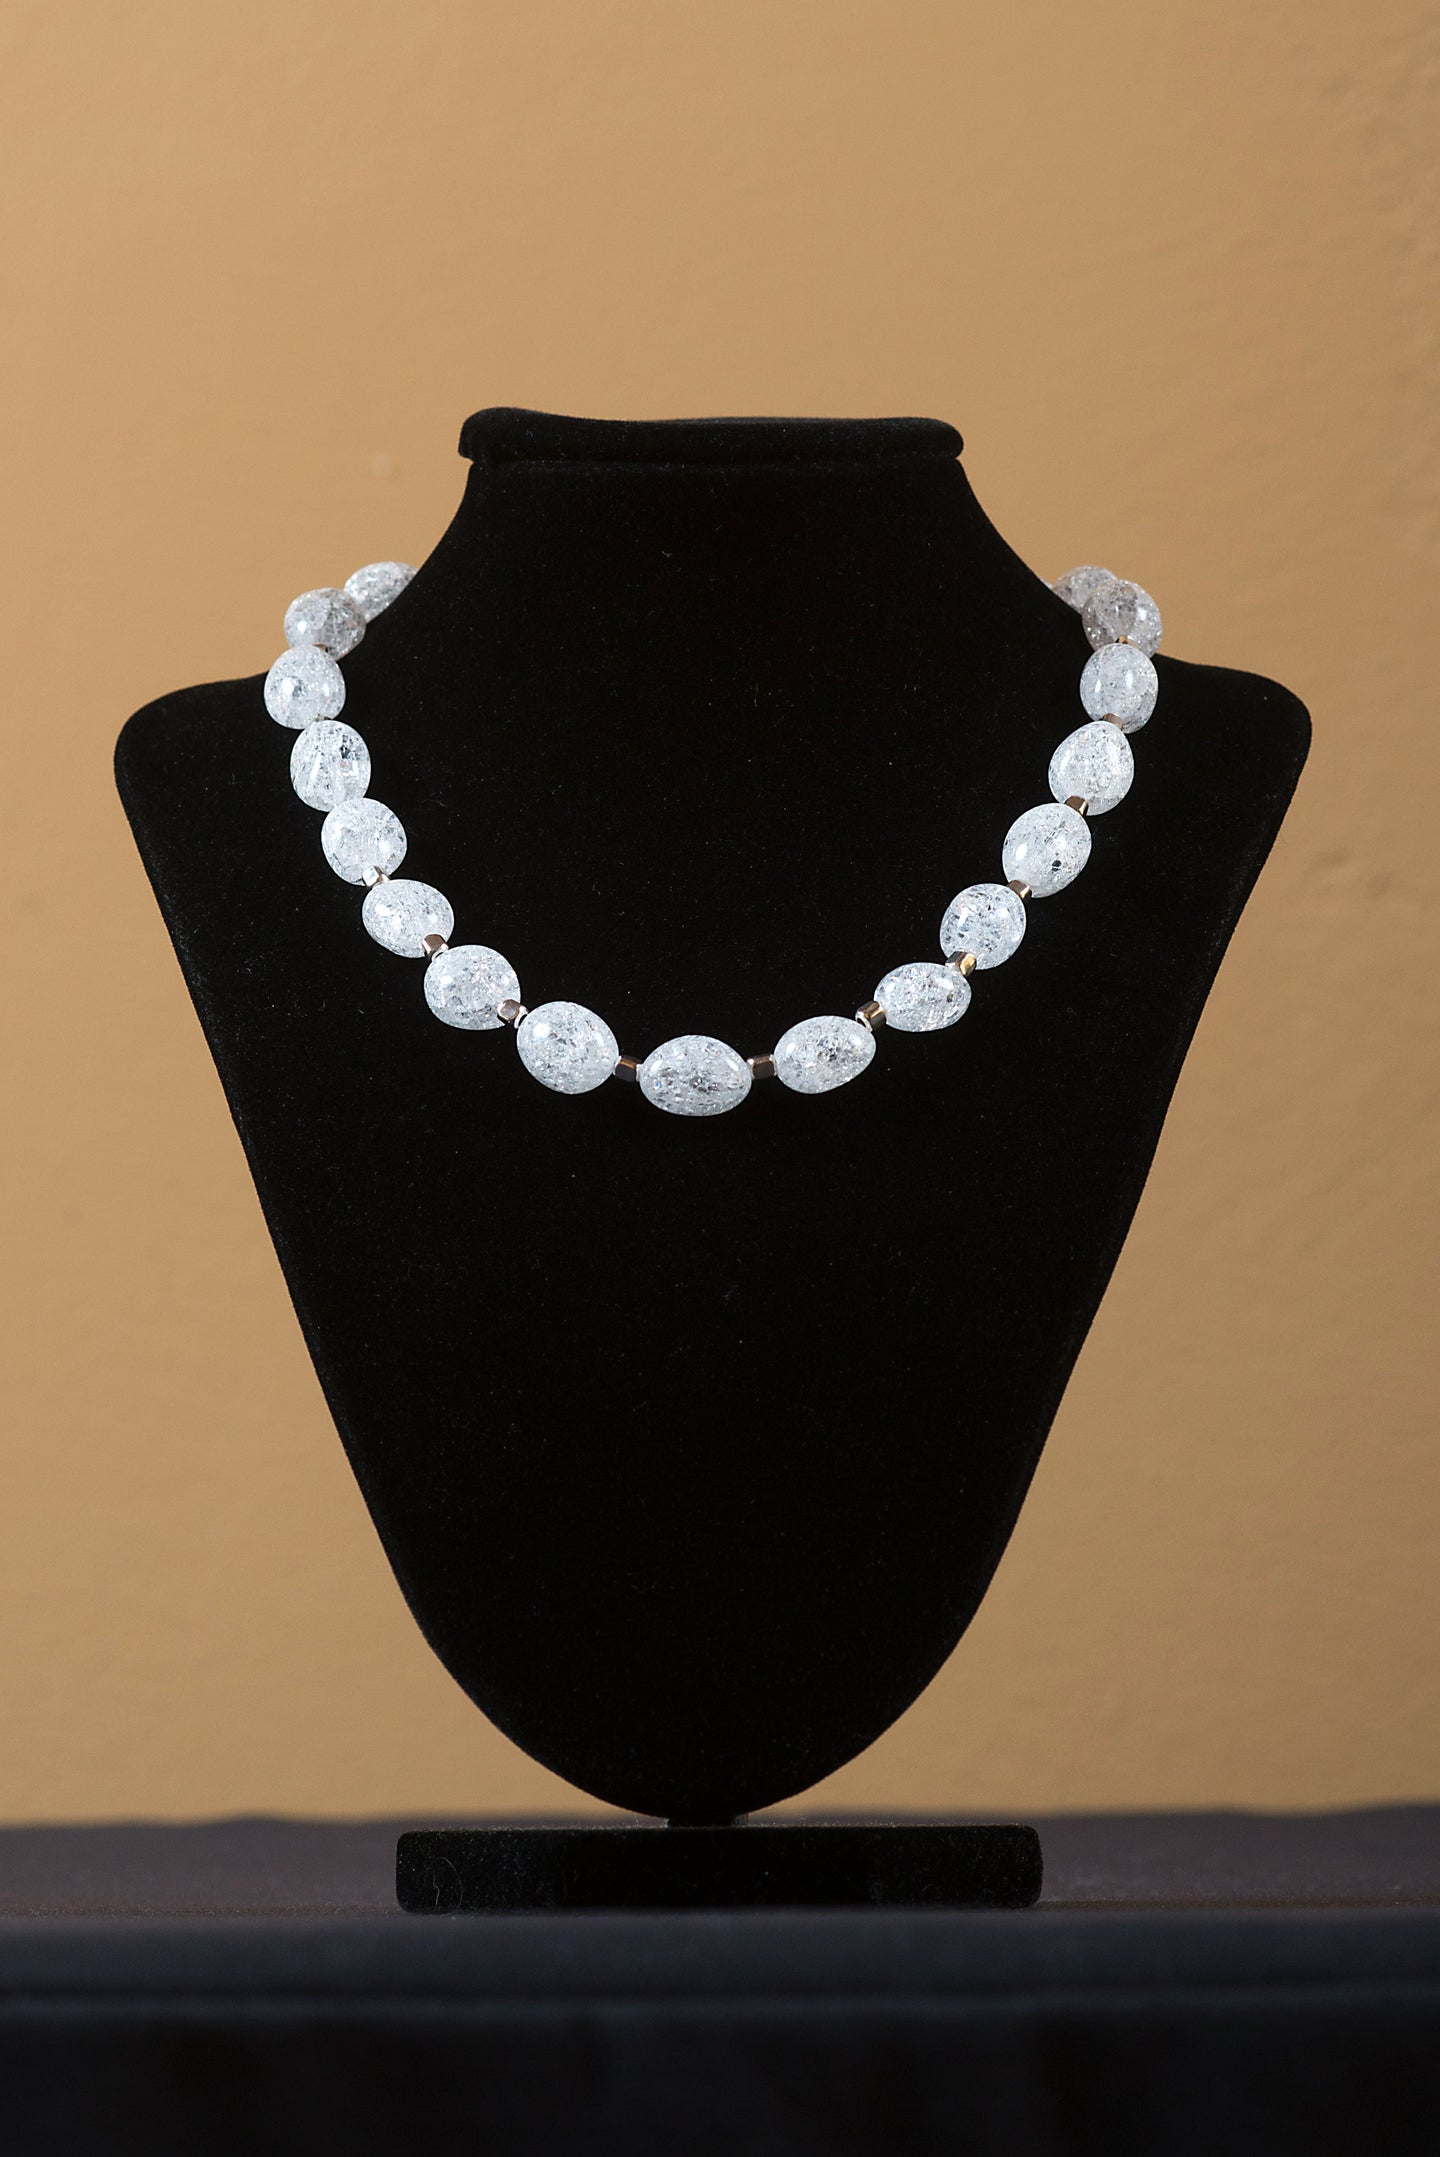 Necklace - Cracked Crystal Beads, Sterling Silver Cubes